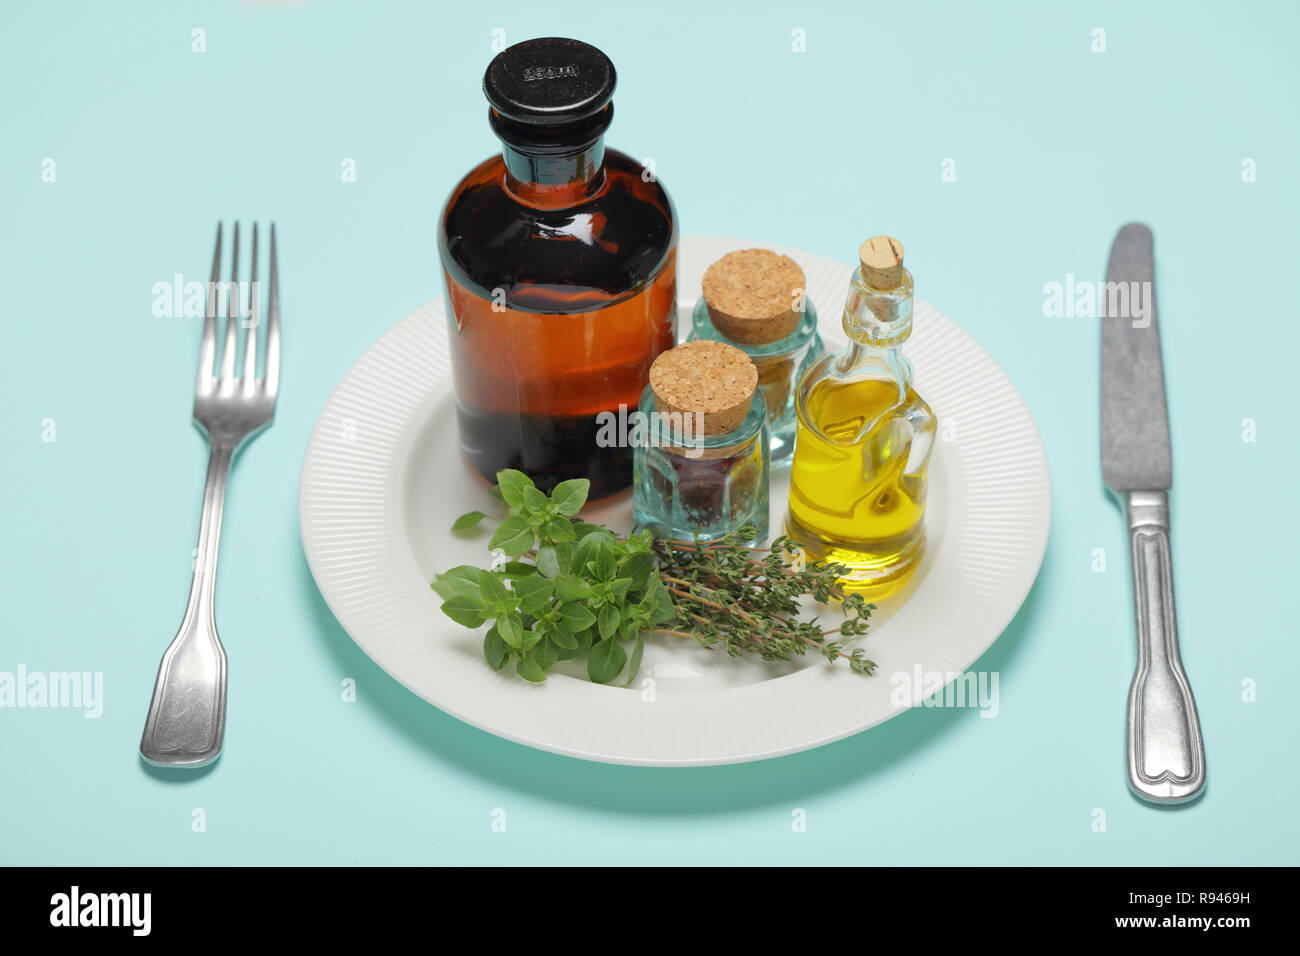 Healthy food concept with olive oil, herbs, and spices Stock Photo